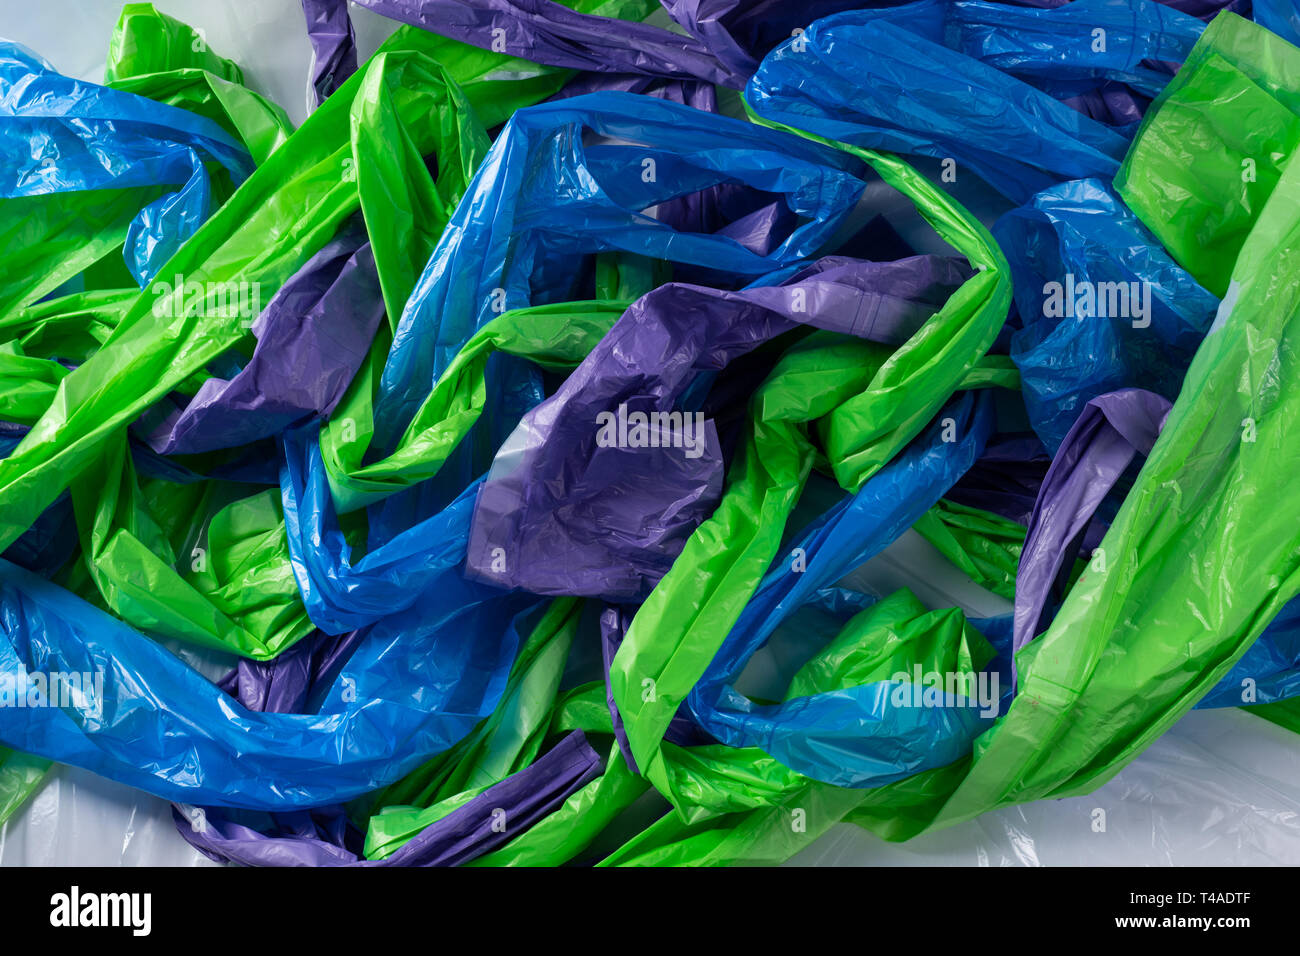 Scaring amount of colorful plastic trash bags Stock Photo